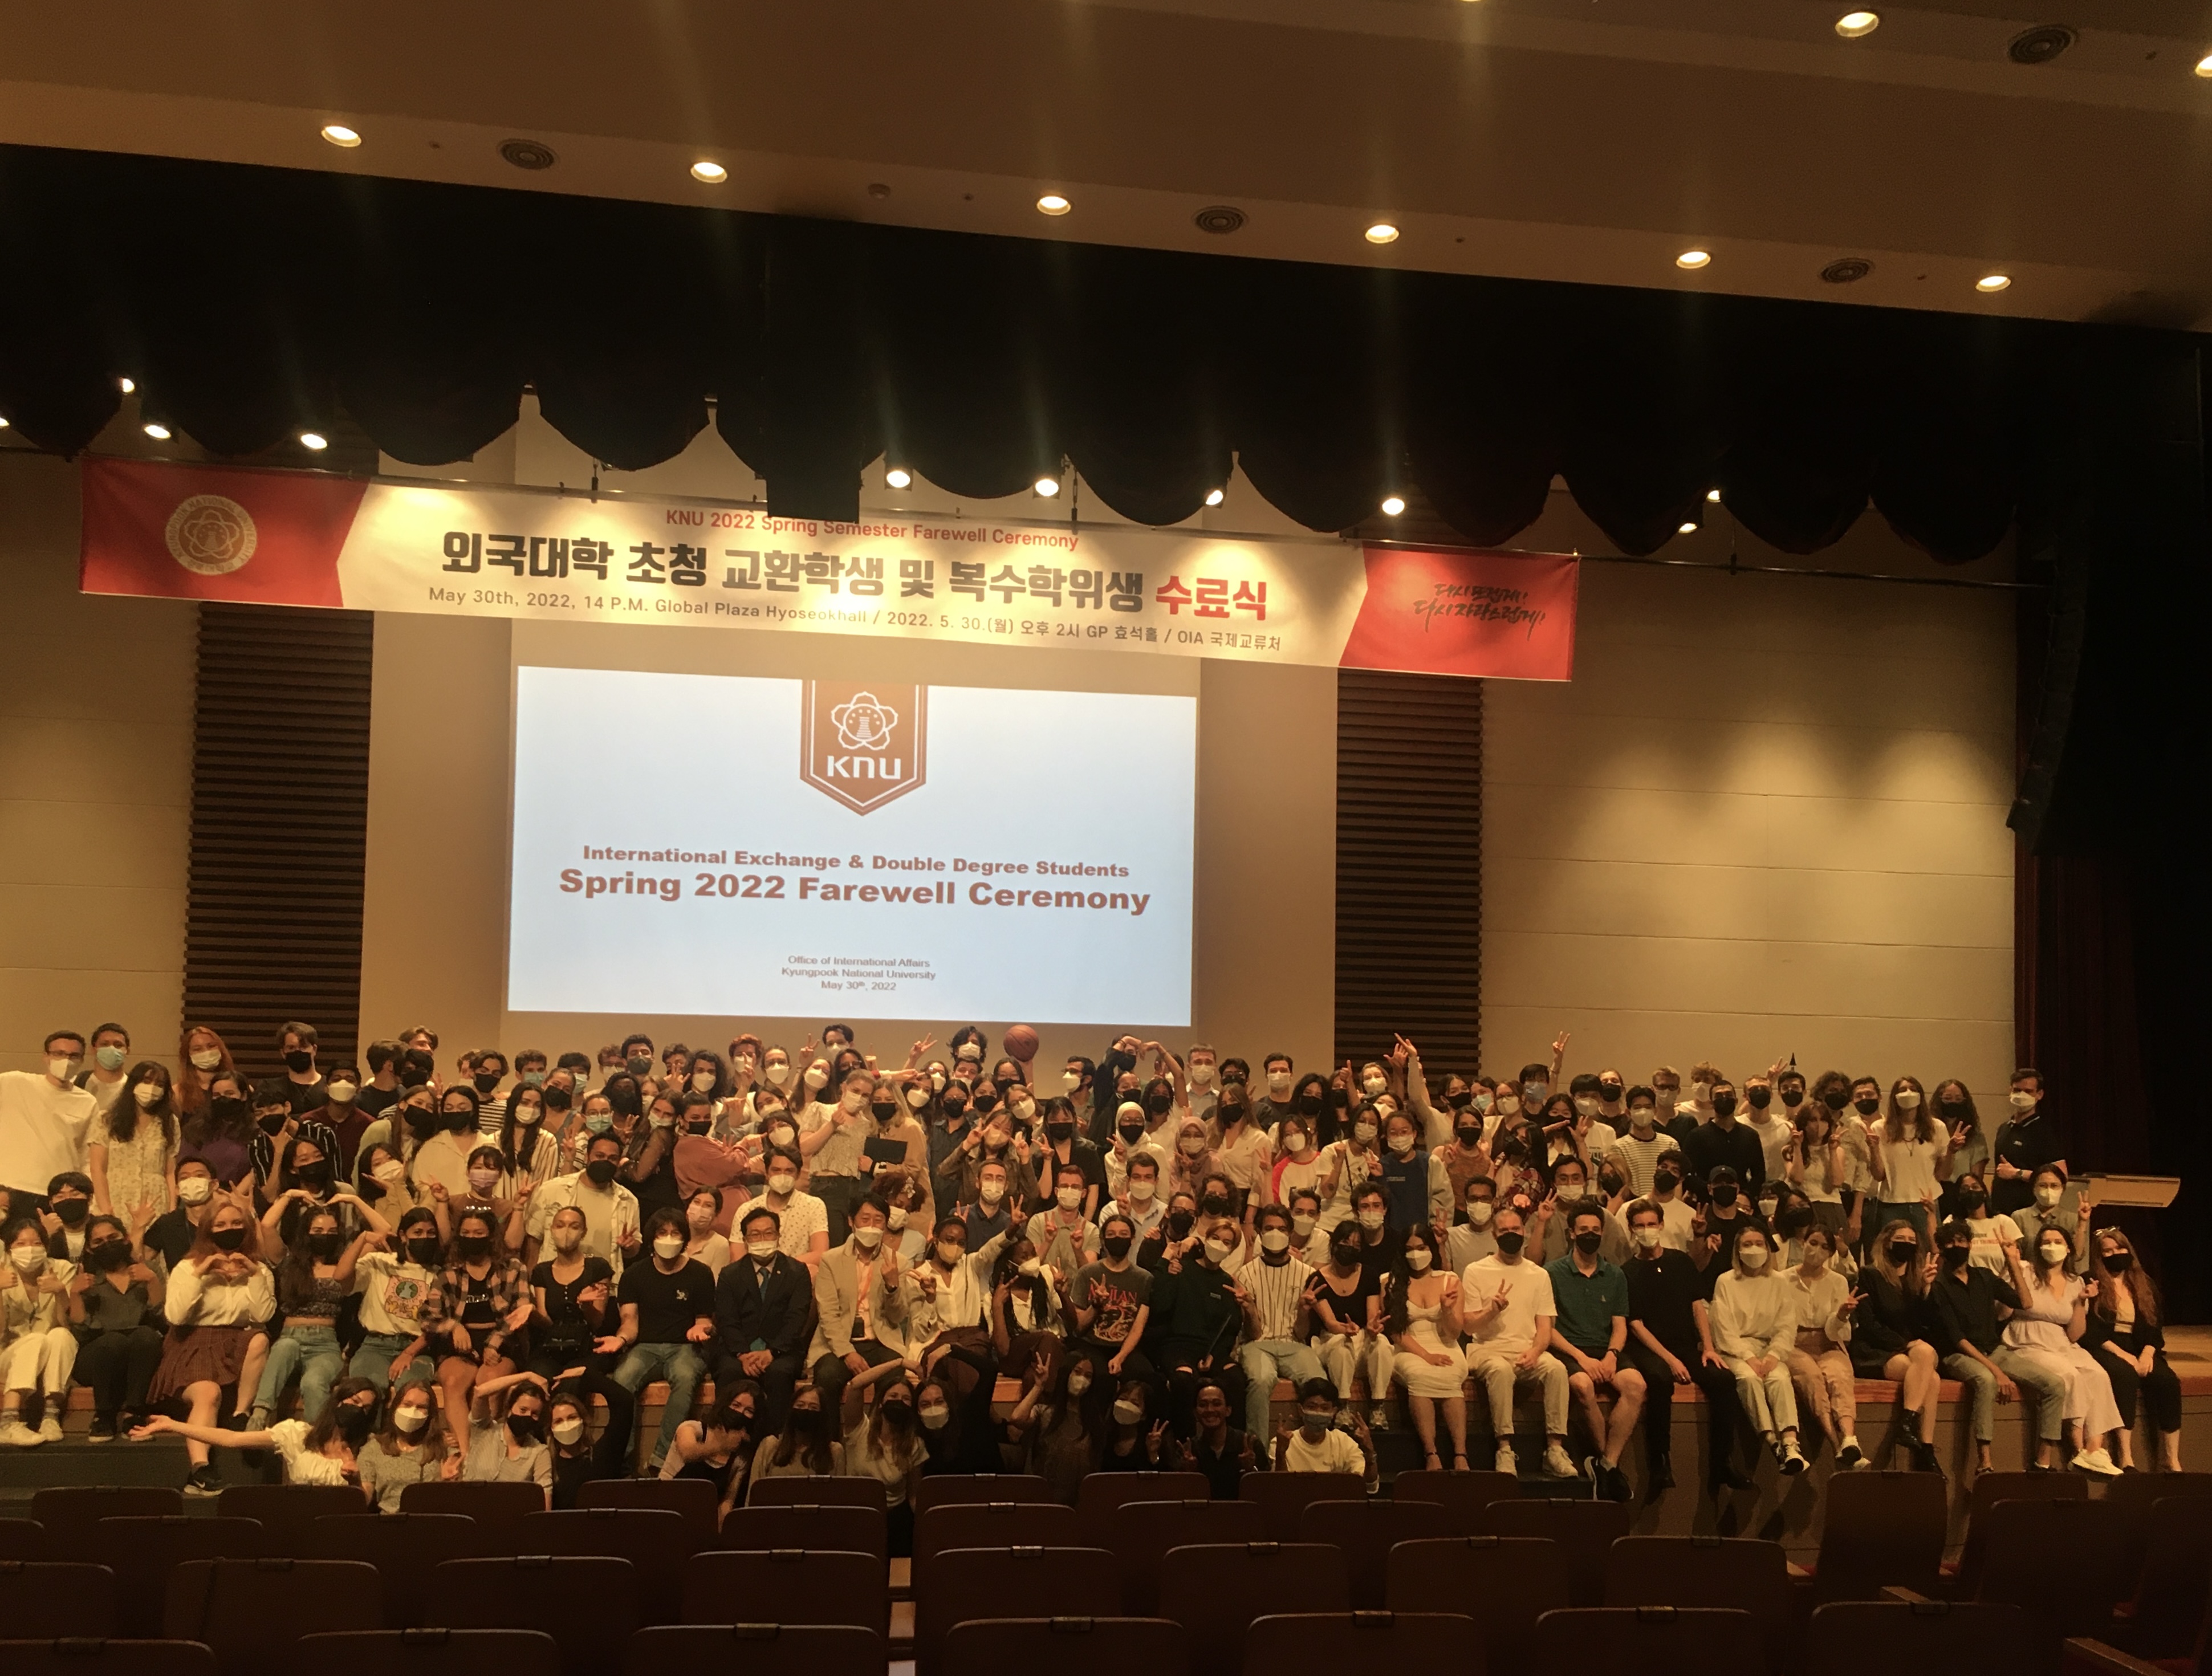 2022 Spring farewell ceremony for exchange & double degree students 관련 이미지입니다